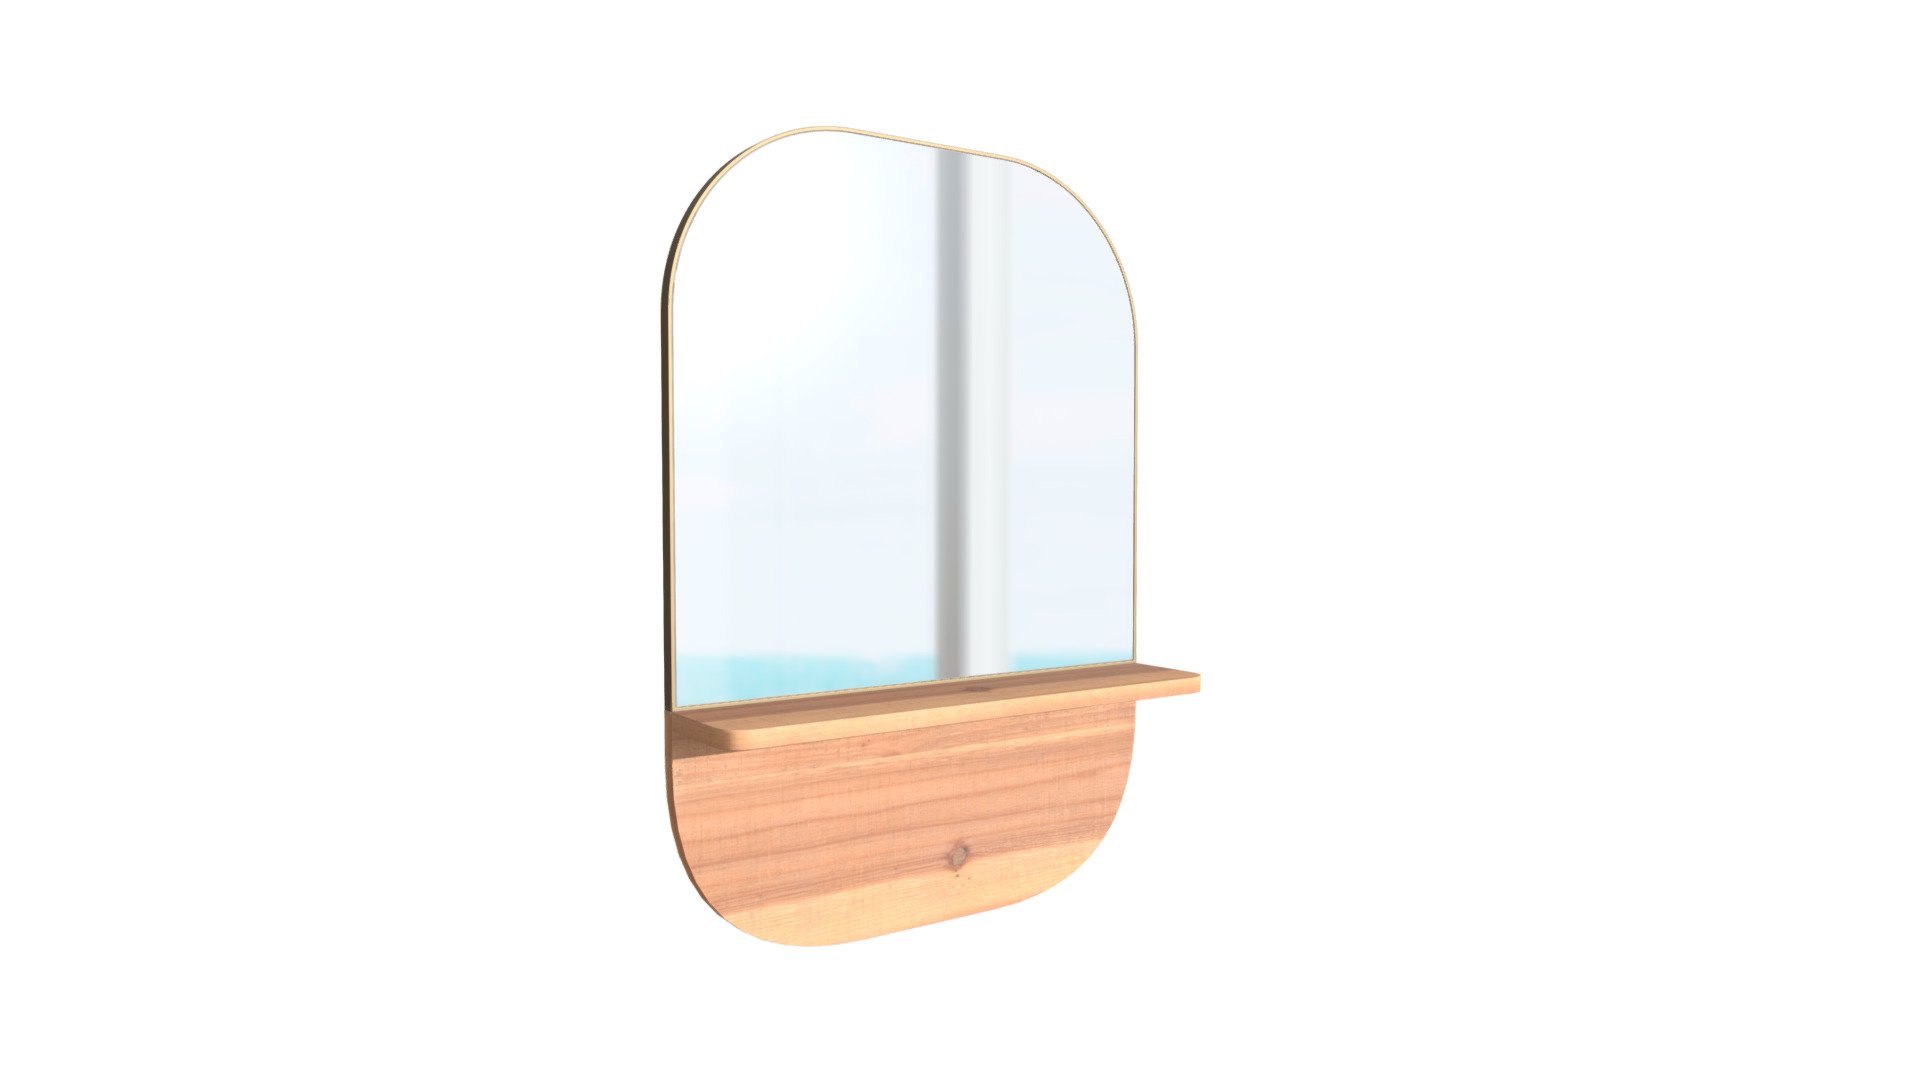 https://www.zuomod.com/meridian-shelf-mirror-gold-brown
A multifunctional mirror to place your keys in the entryway or your bathroom essentials. You can’t go wrong in styling this gold coated frame with wood shelf. It’s a timeless piece 3d model